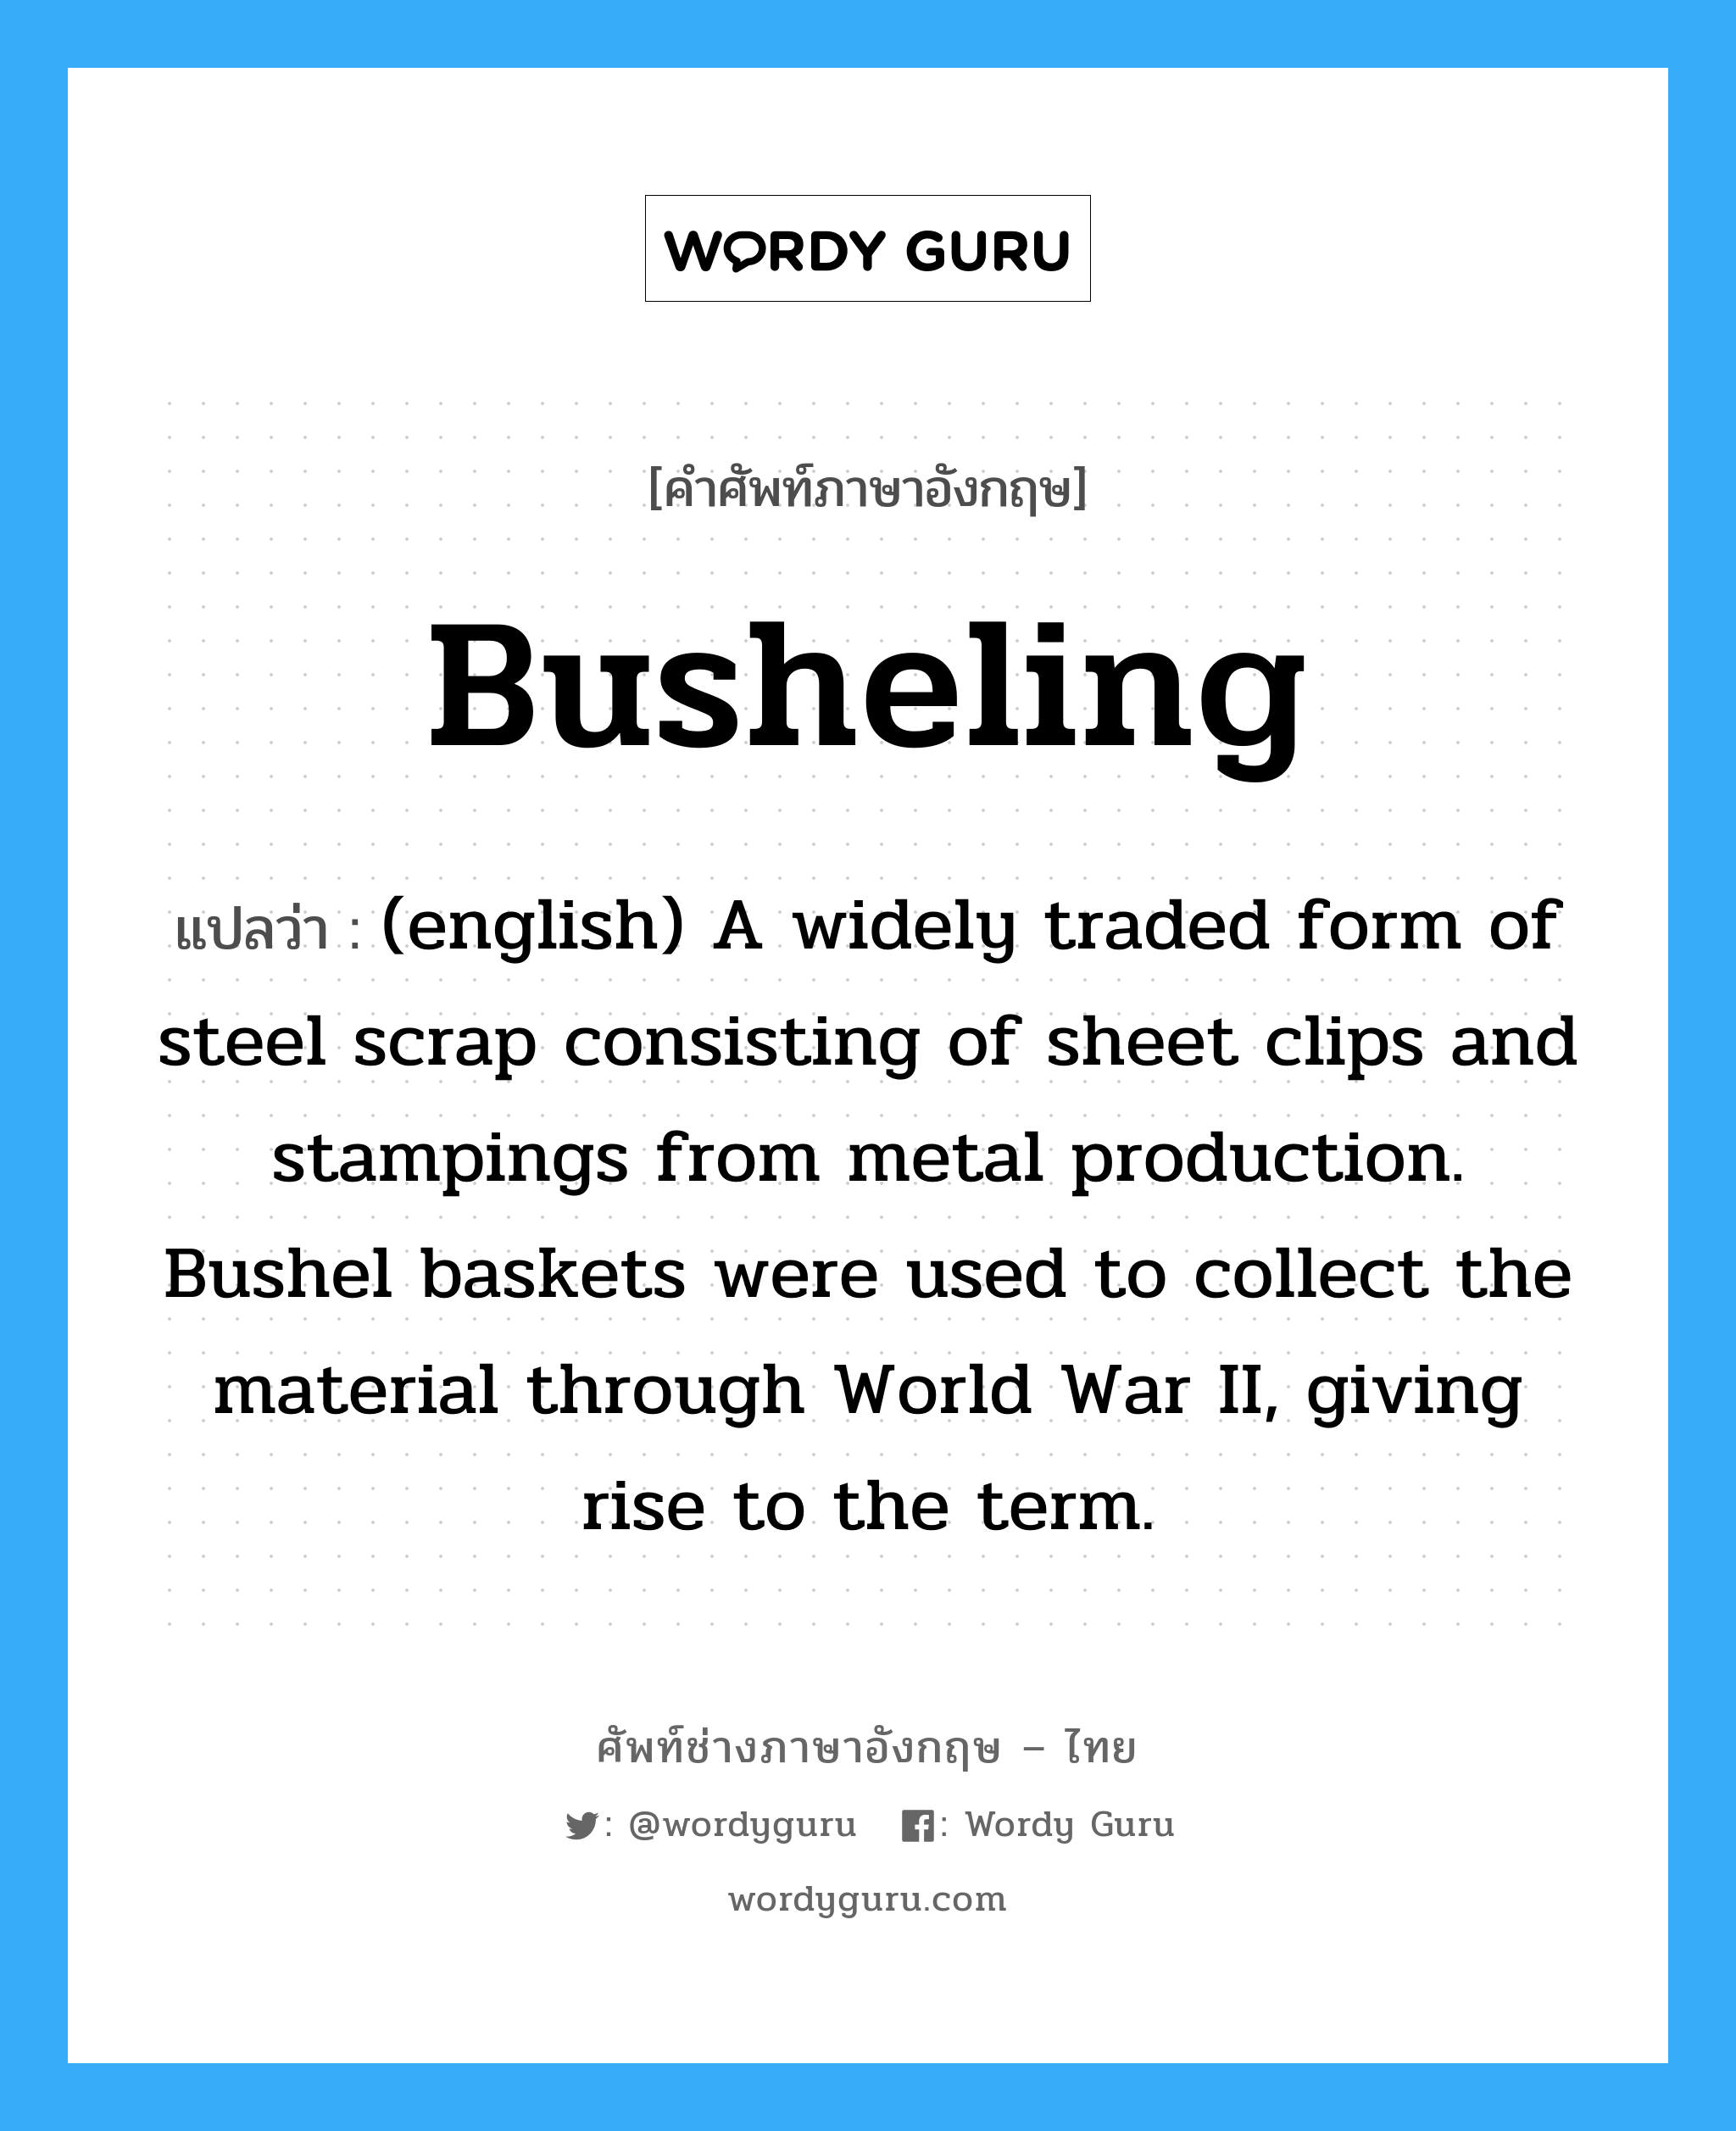 (english) A widely traded form of steel scrap consisting of sheet clips and stampings from metal production. Bushel baskets were used to collect the material through World War II, giving rise to the term. ภาษาอังกฤษ?, คำศัพท์ช่างภาษาอังกฤษ - ไทย (english) A widely traded form of steel scrap consisting of sheet clips and stampings from metal production. Bushel baskets were used to collect the material through World War II, giving rise to the term. คำศัพท์ภาษาอังกฤษ (english) A widely traded form of steel scrap consisting of sheet clips and stampings from metal production. Bushel baskets were used to collect the material through World War II, giving rise to the term. แปลว่า Busheling